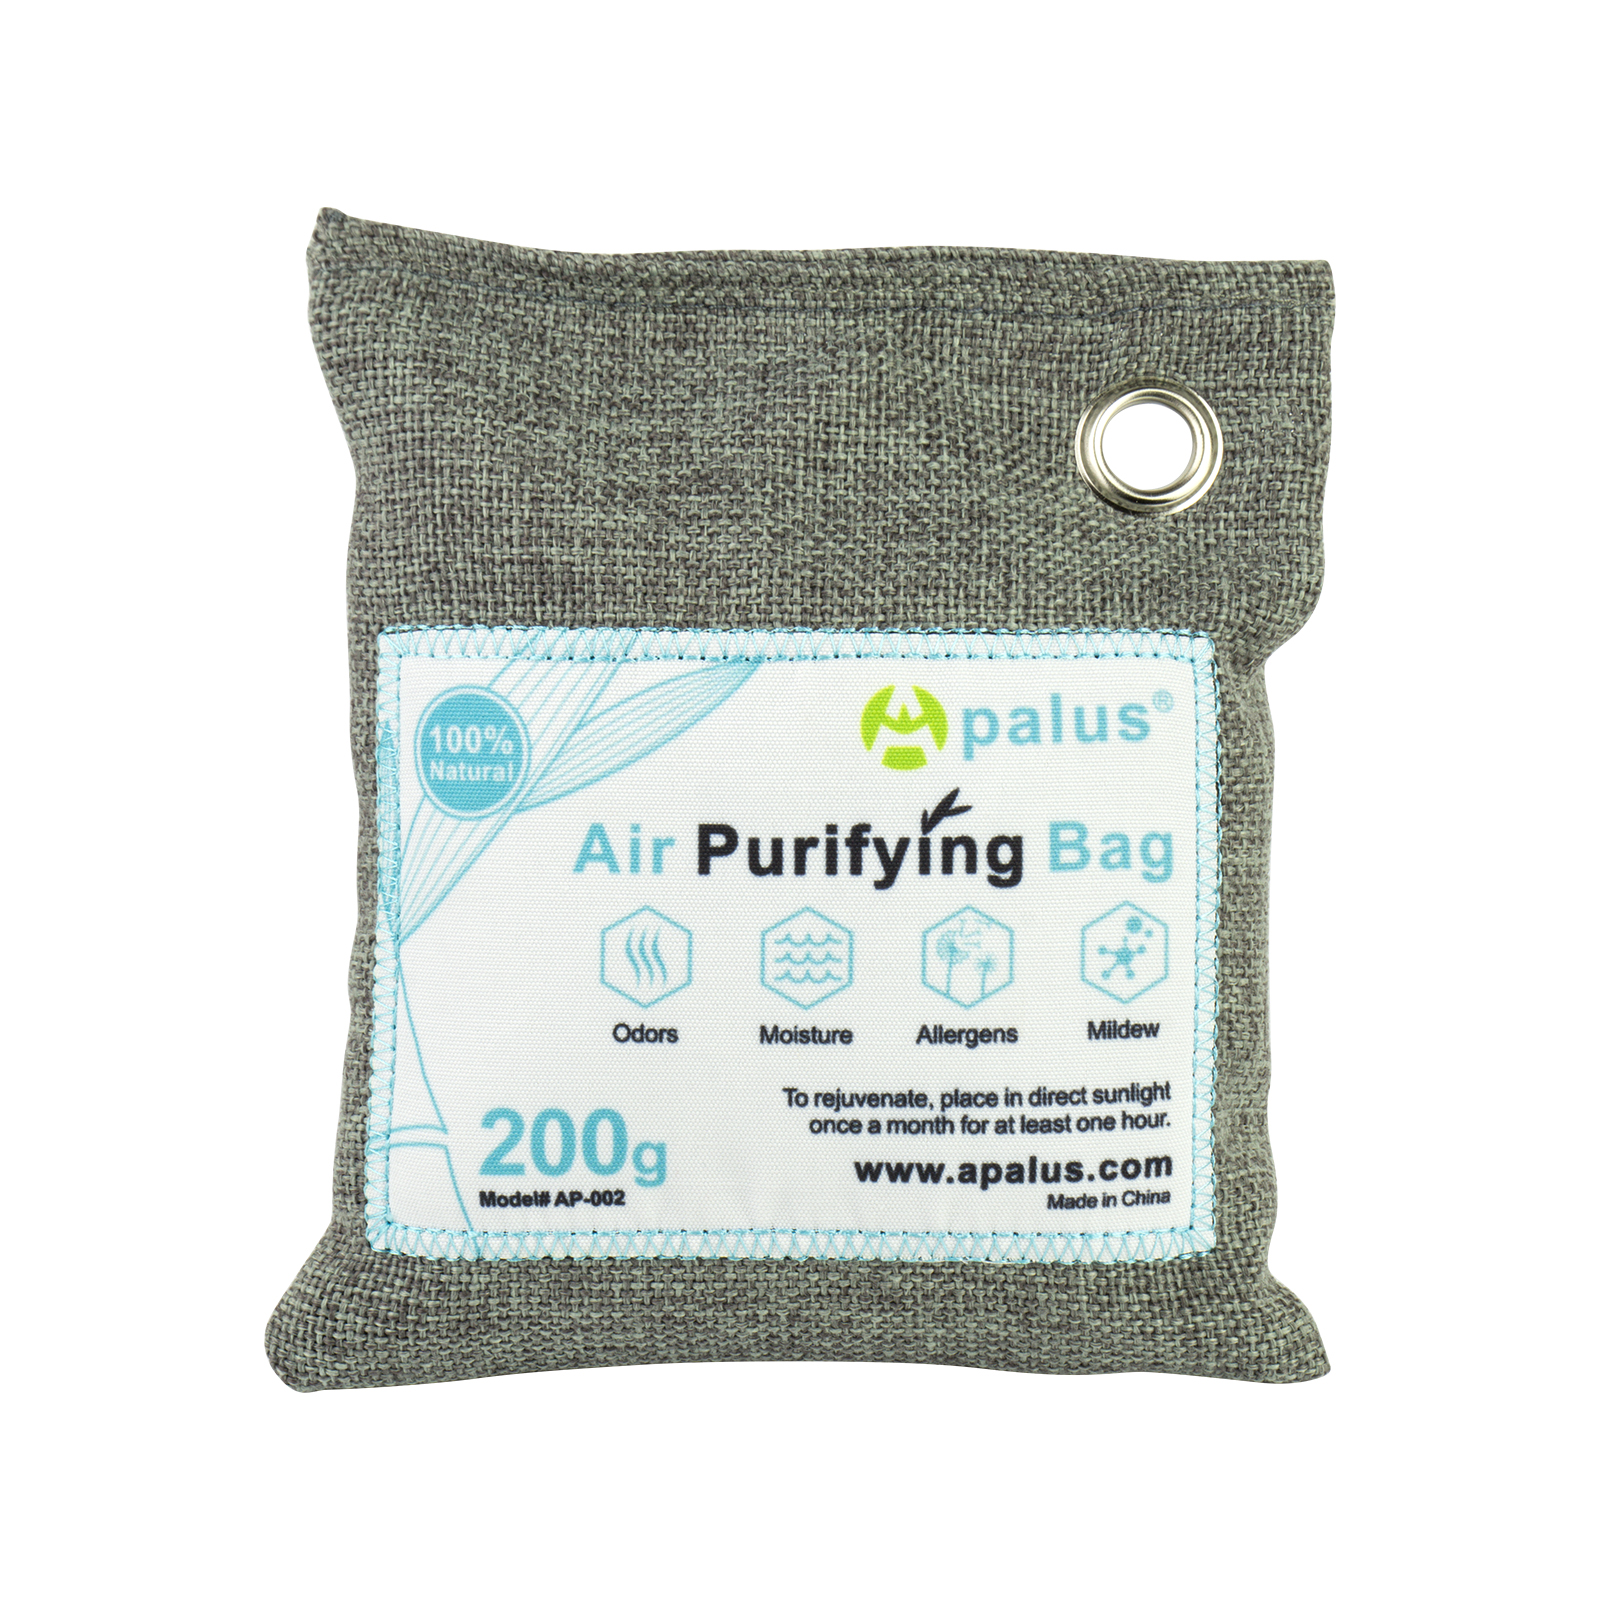 Apalus Air Purifying Bag, Bamboo Activated Charcoal Air Freshener, Car Air Dehumidifier, Deodorizer and Purifier Bags-100% Natural & Chemical Free Moisture, Odor Absorber, 200G 